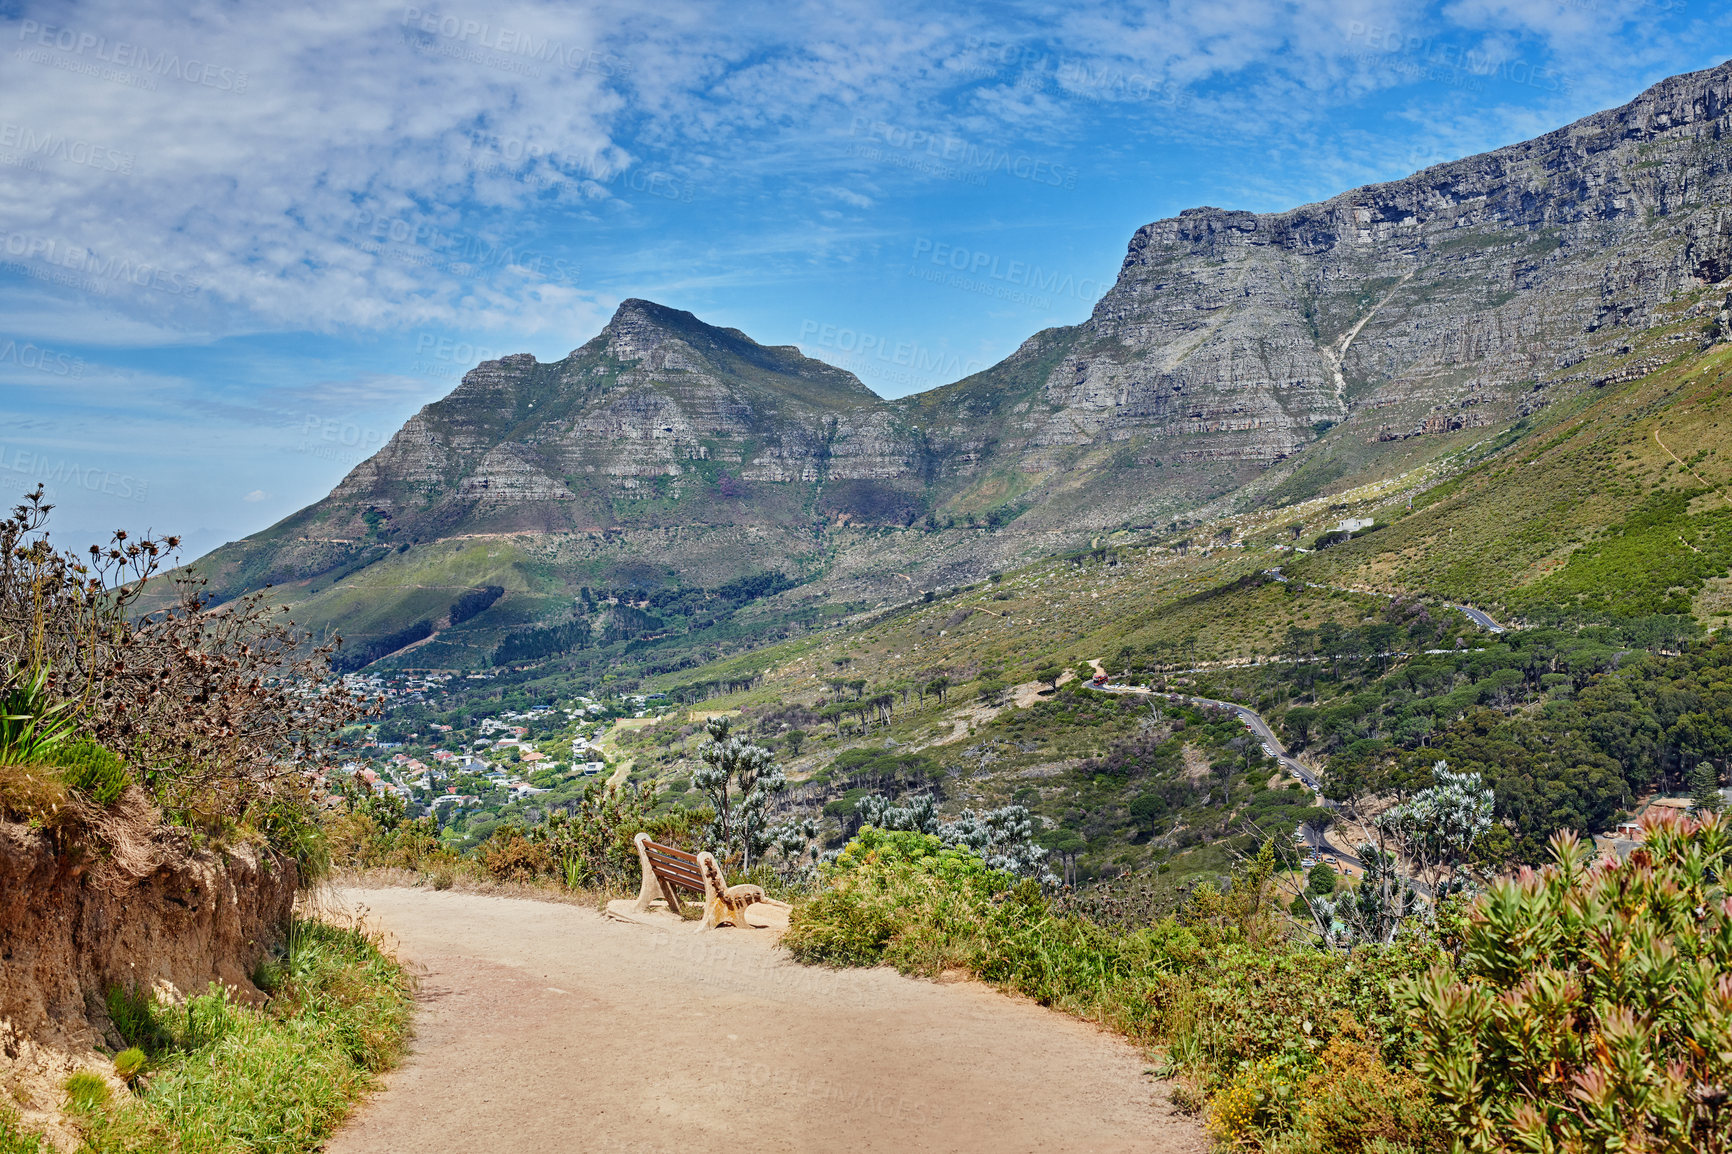 Buy stock photo Beautiful hiking trail on the mountains with a blue cloudy sky background. A zen, nature landscape with a bench overlooking green lush hills and roads for traveling on Table Mountain, South Africa